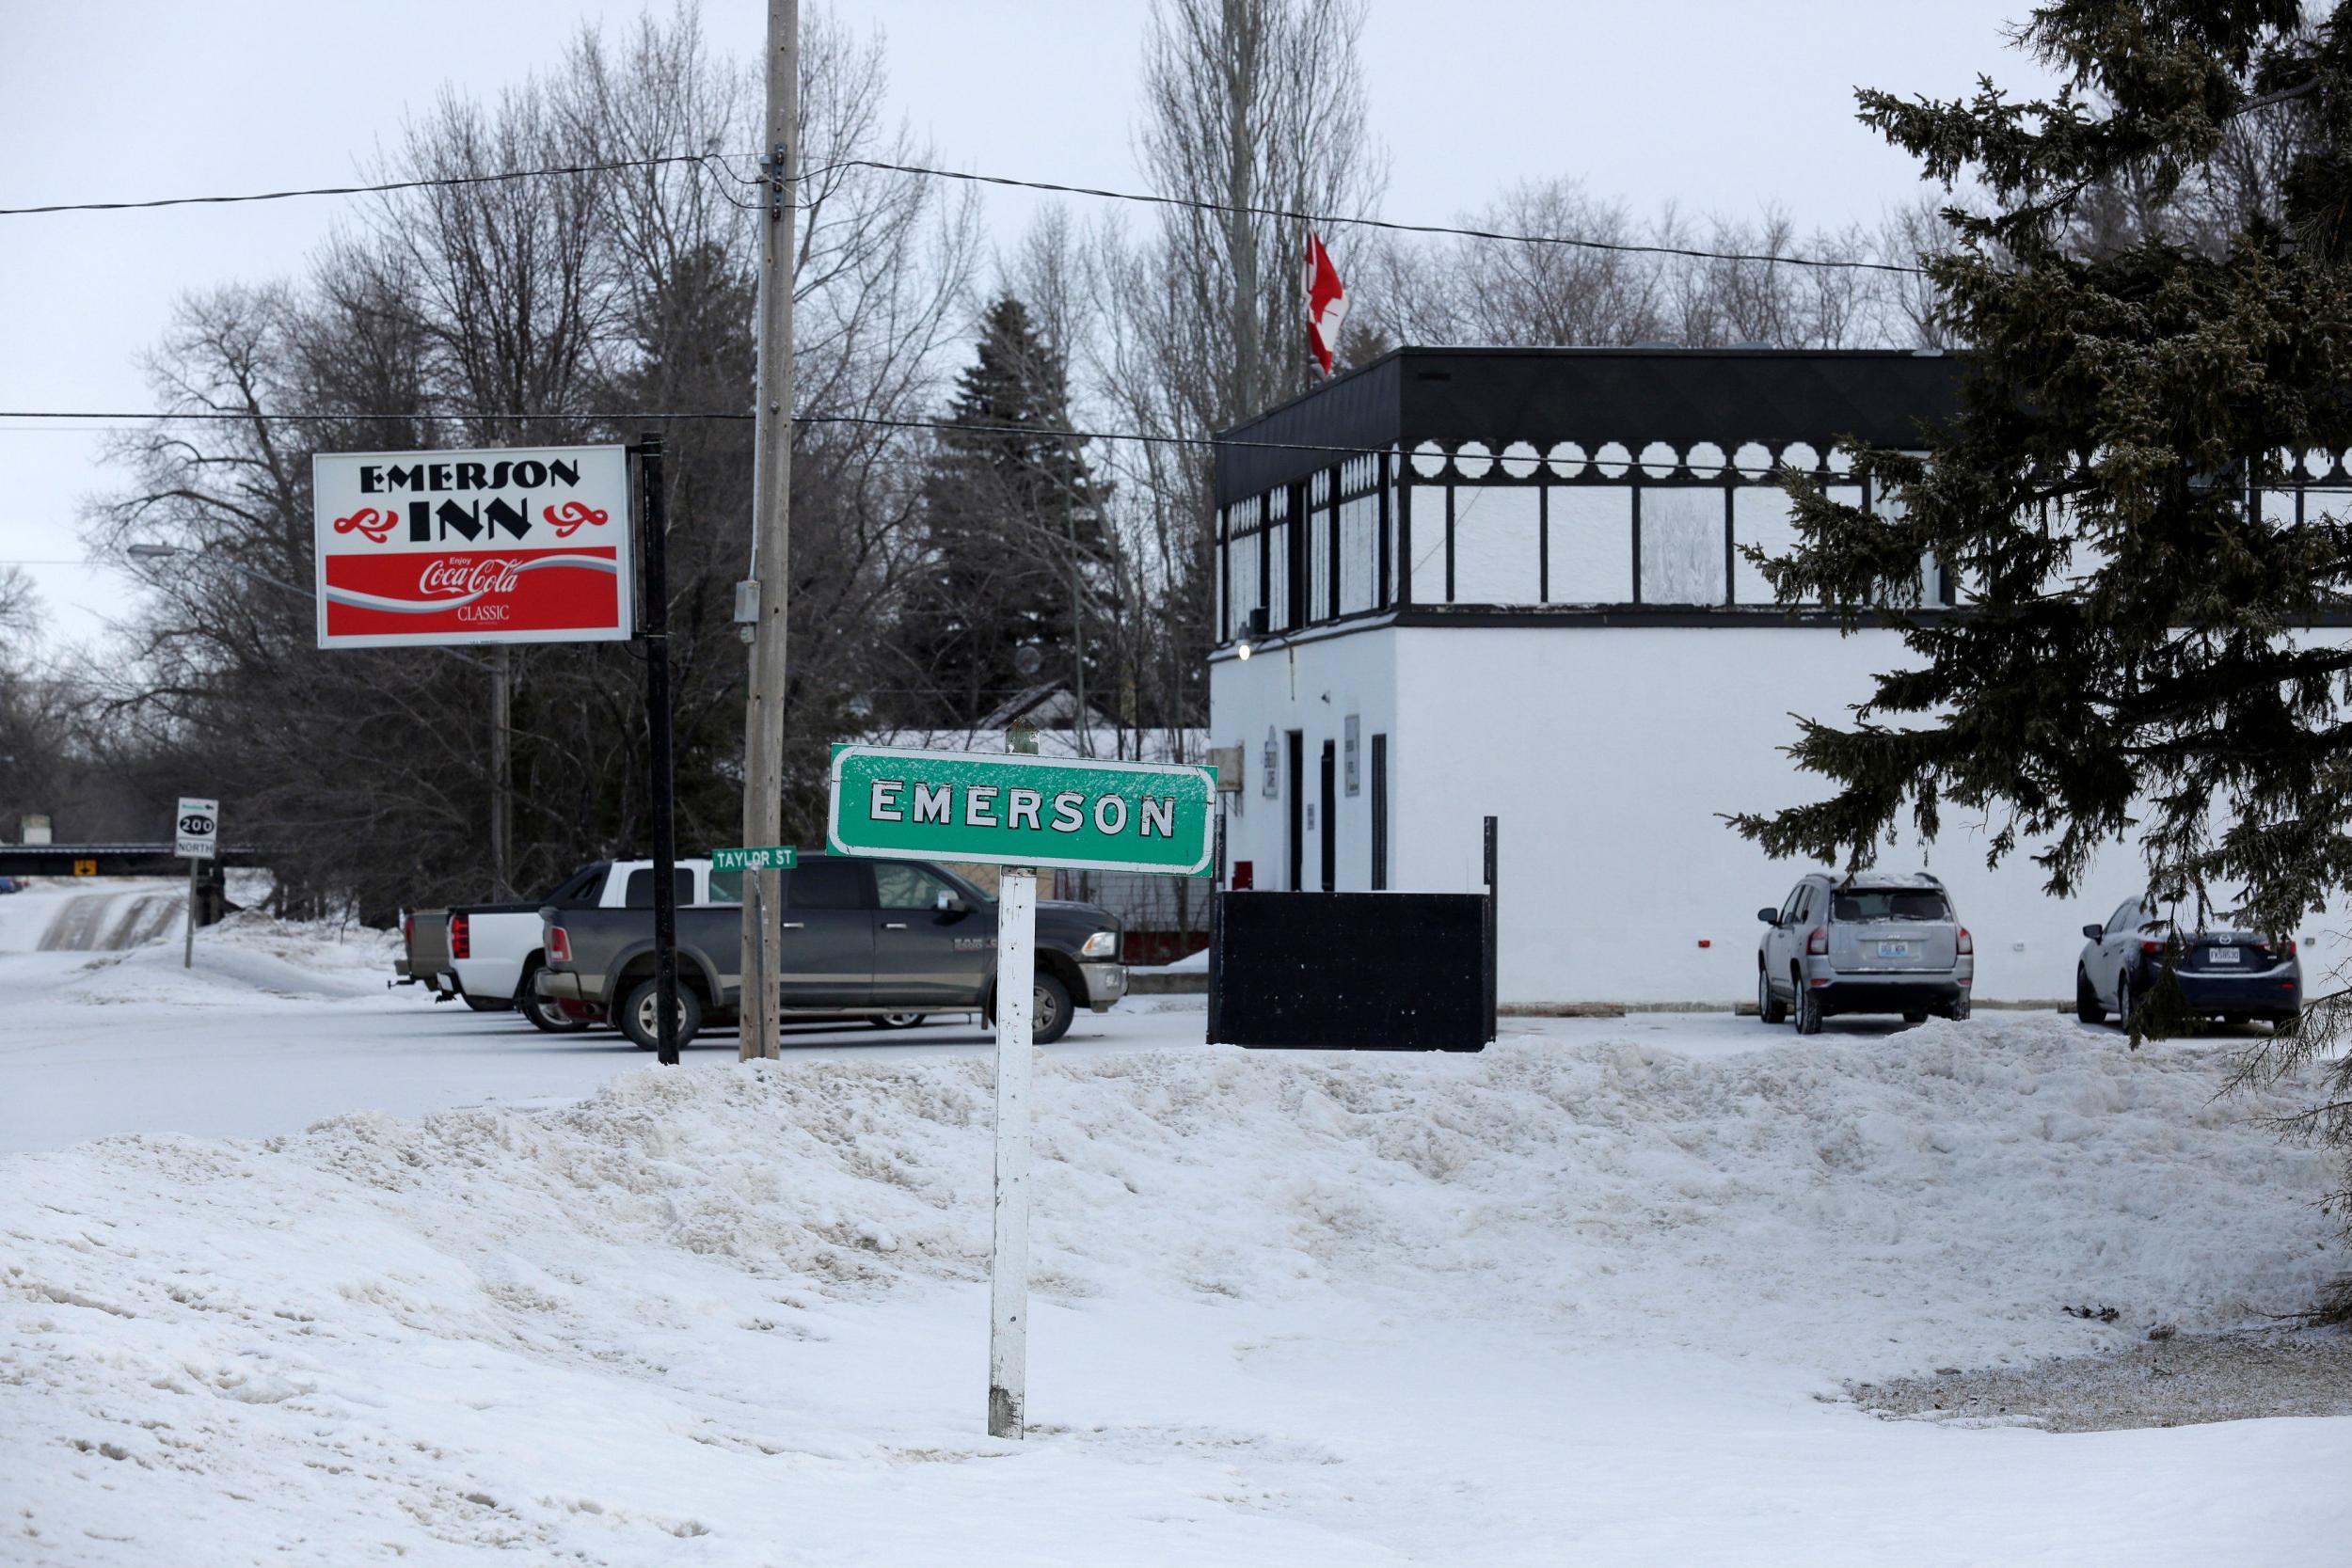 People in Emerson say they have tried to help those entering Canada